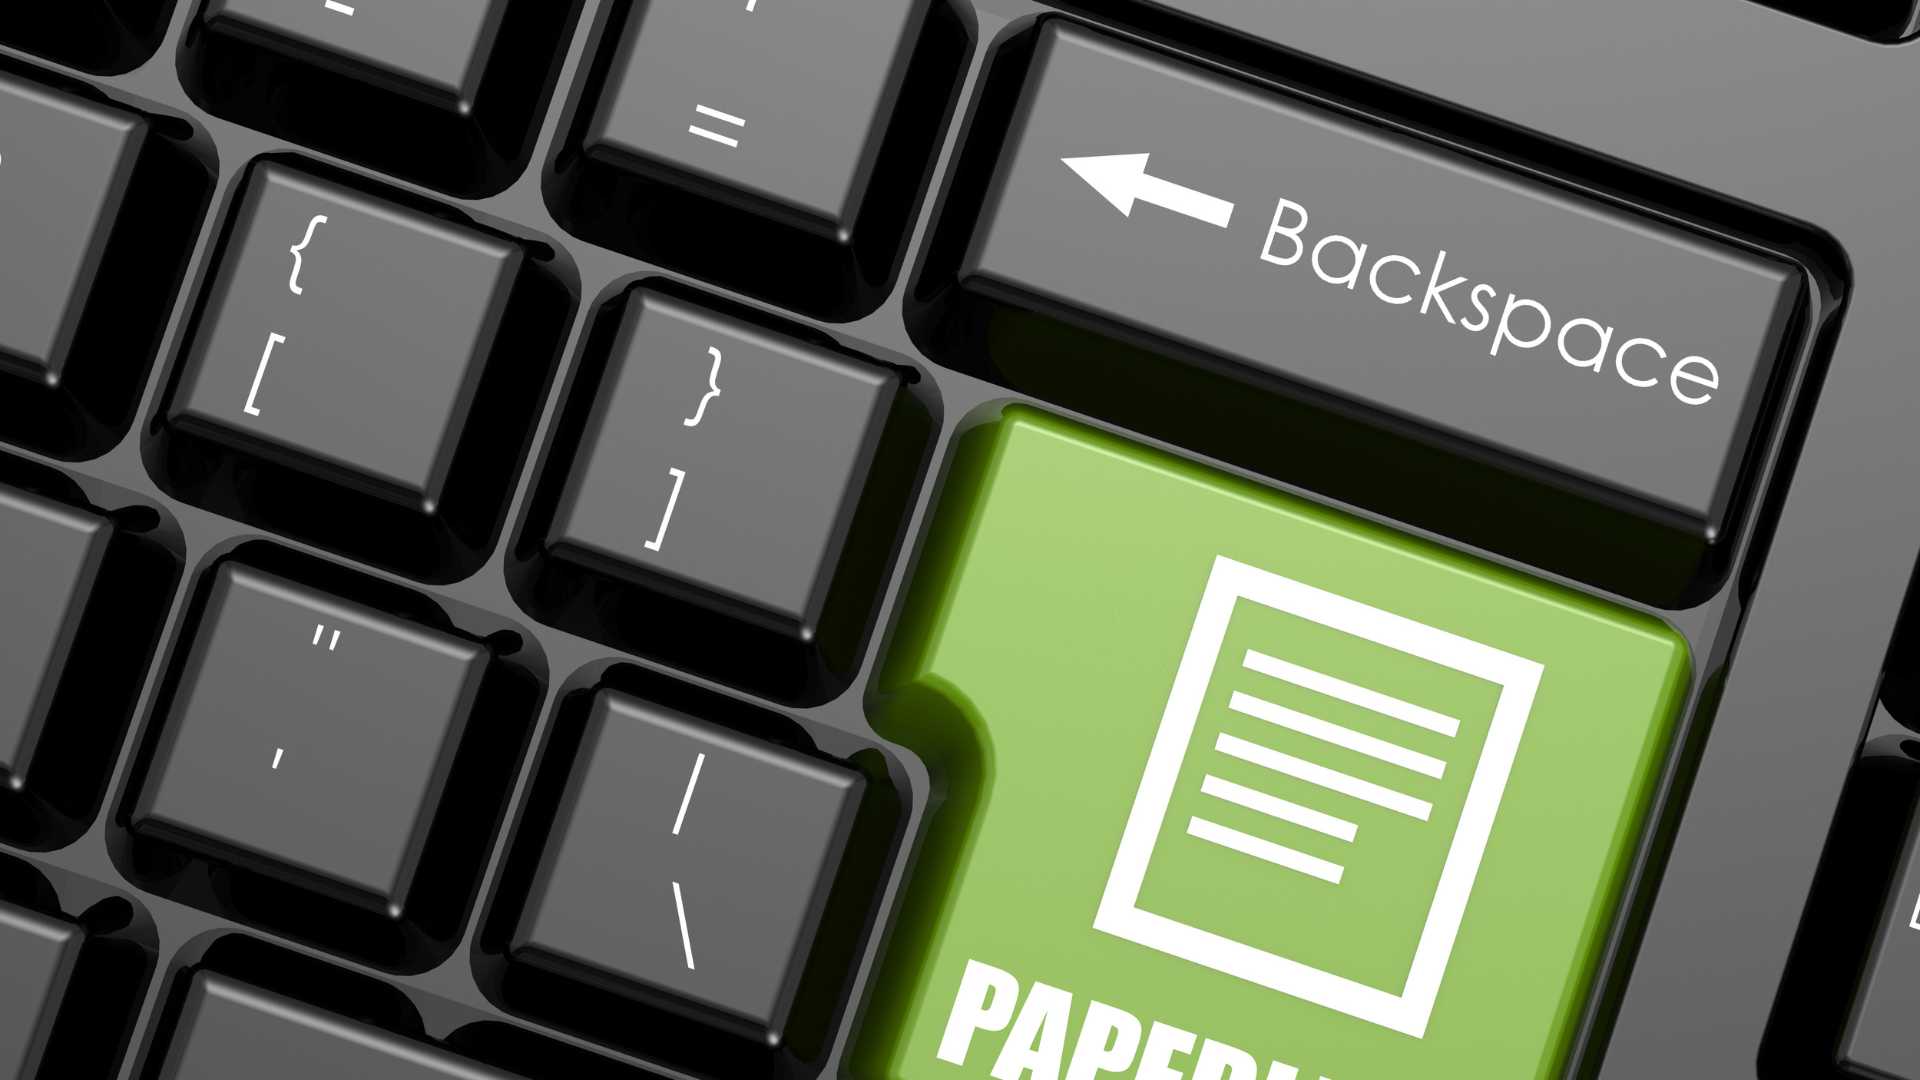 Encourage the use of paperless processes